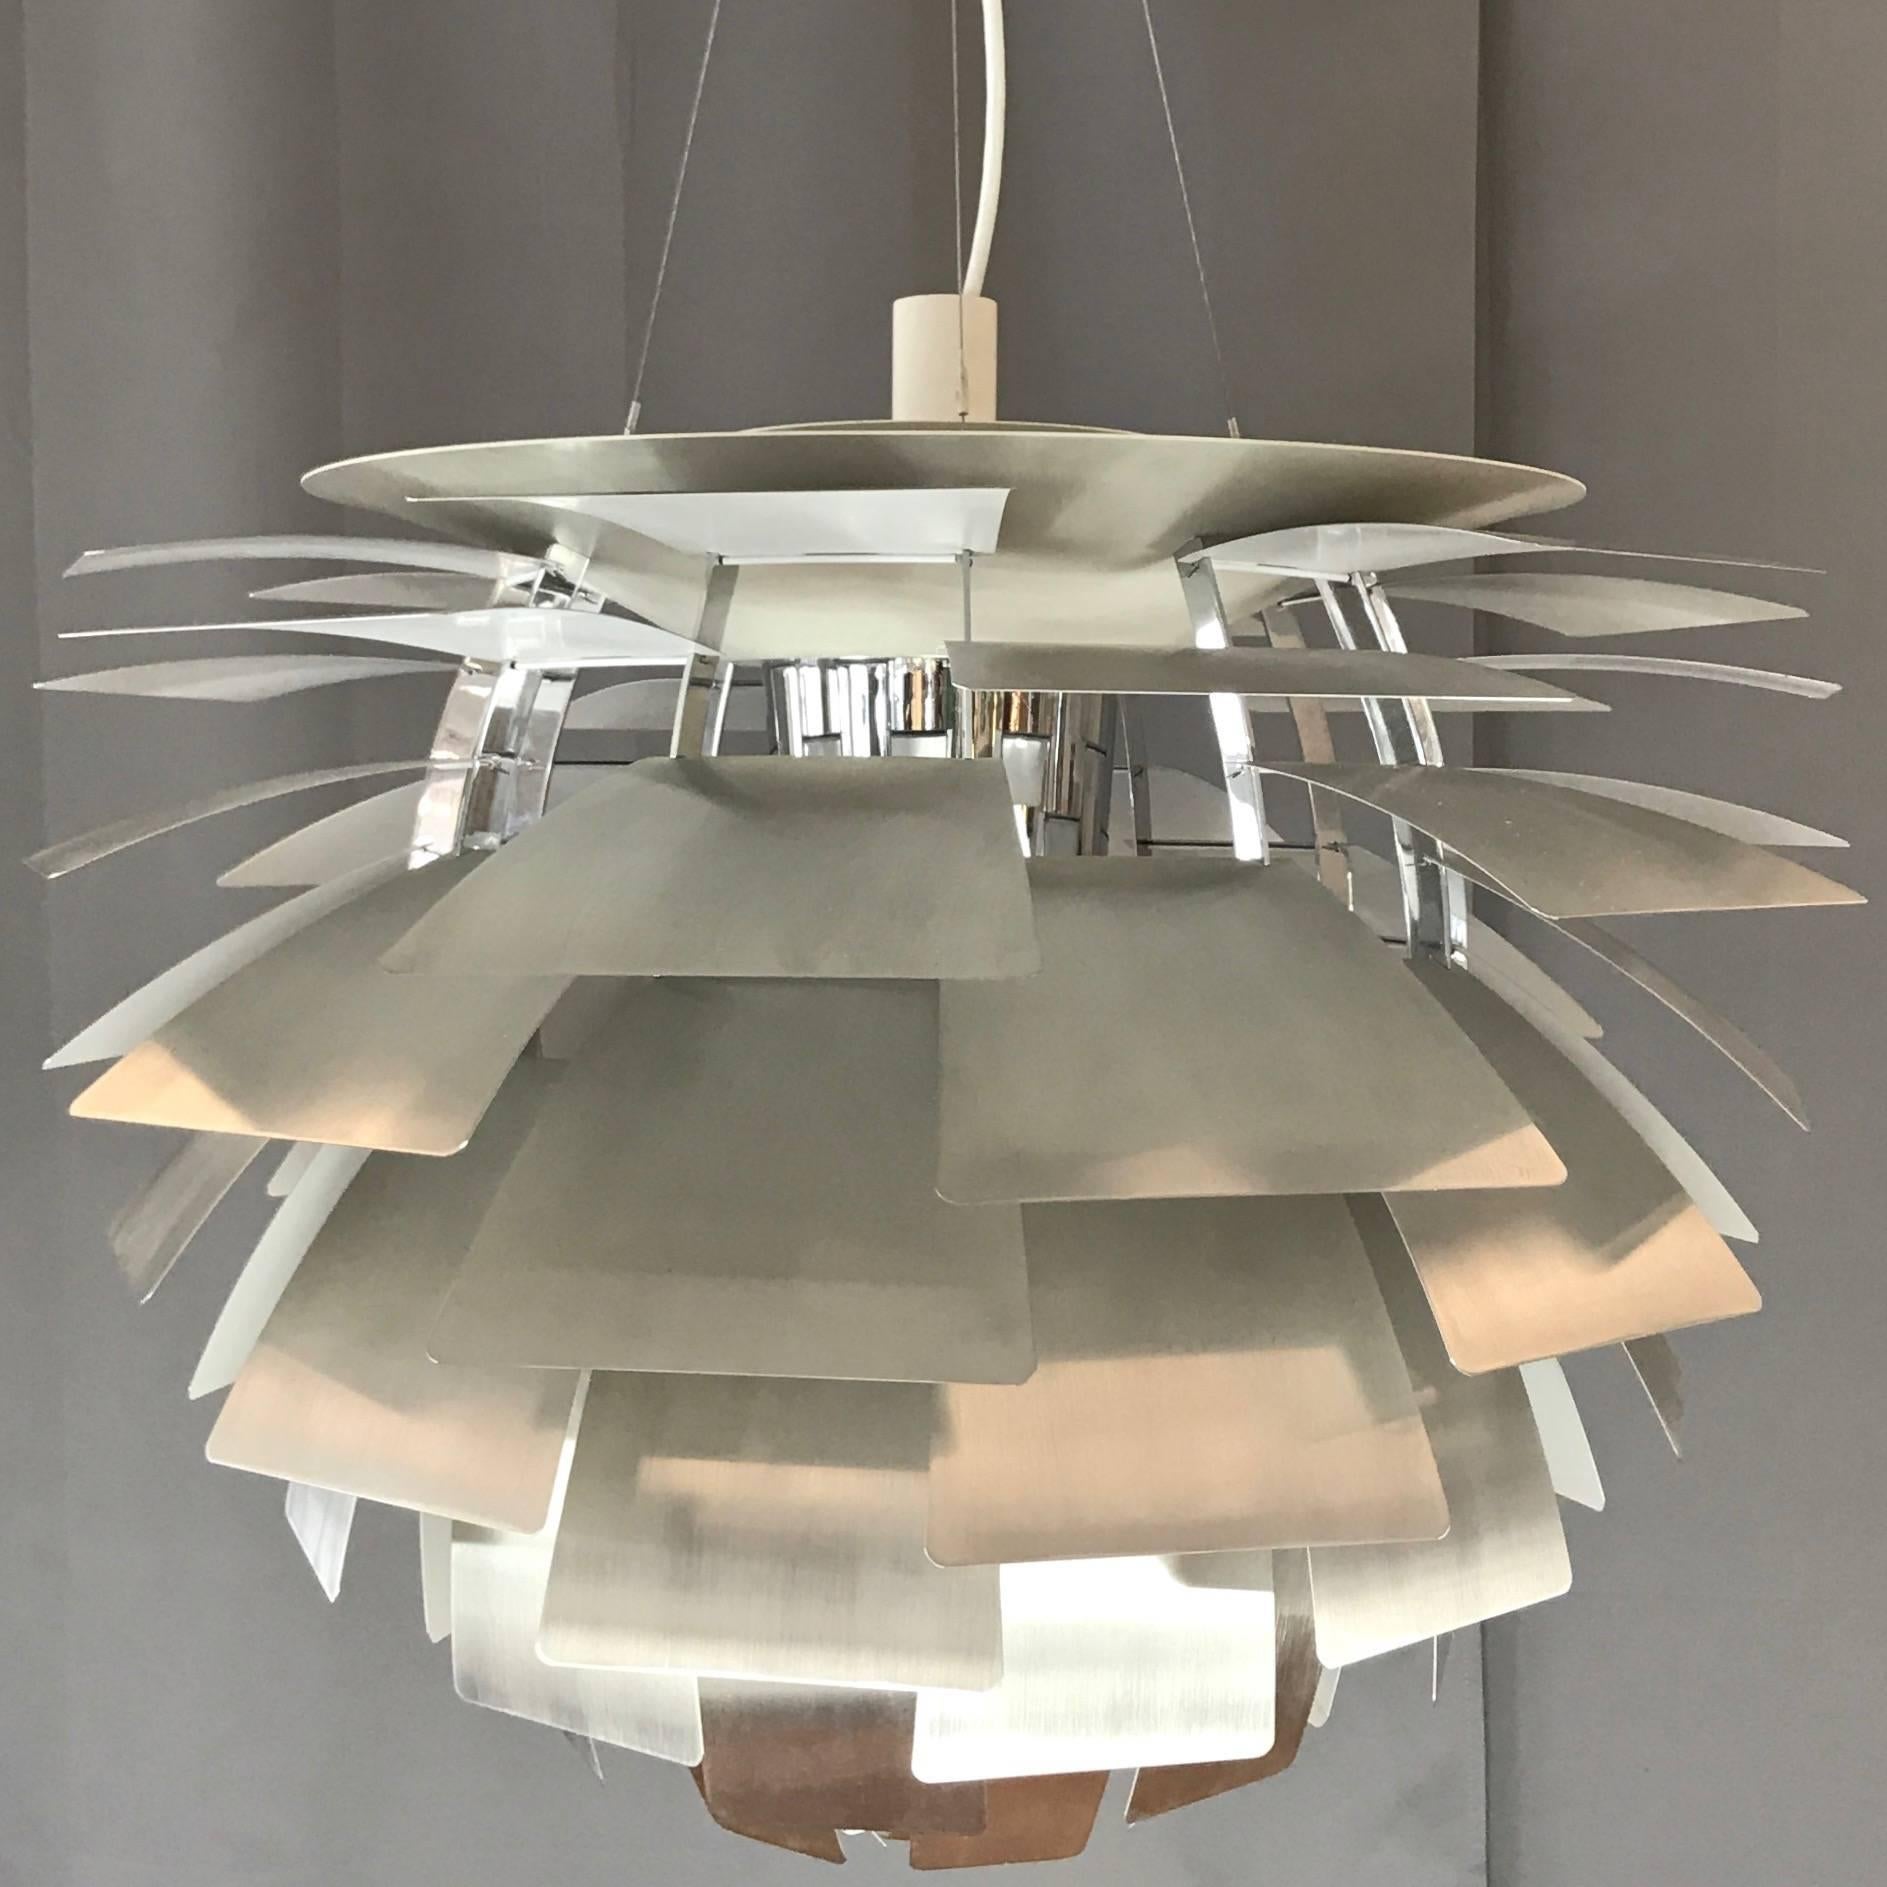 A monumental steel PH Artichoke pendant light by Poul Henningsen for Louis Poulsen in the largest of four sizes produced, which is a less commonly found combination in vintage pieces.

Designed in 1958 for the Langelinie Pavillonen restaurant in